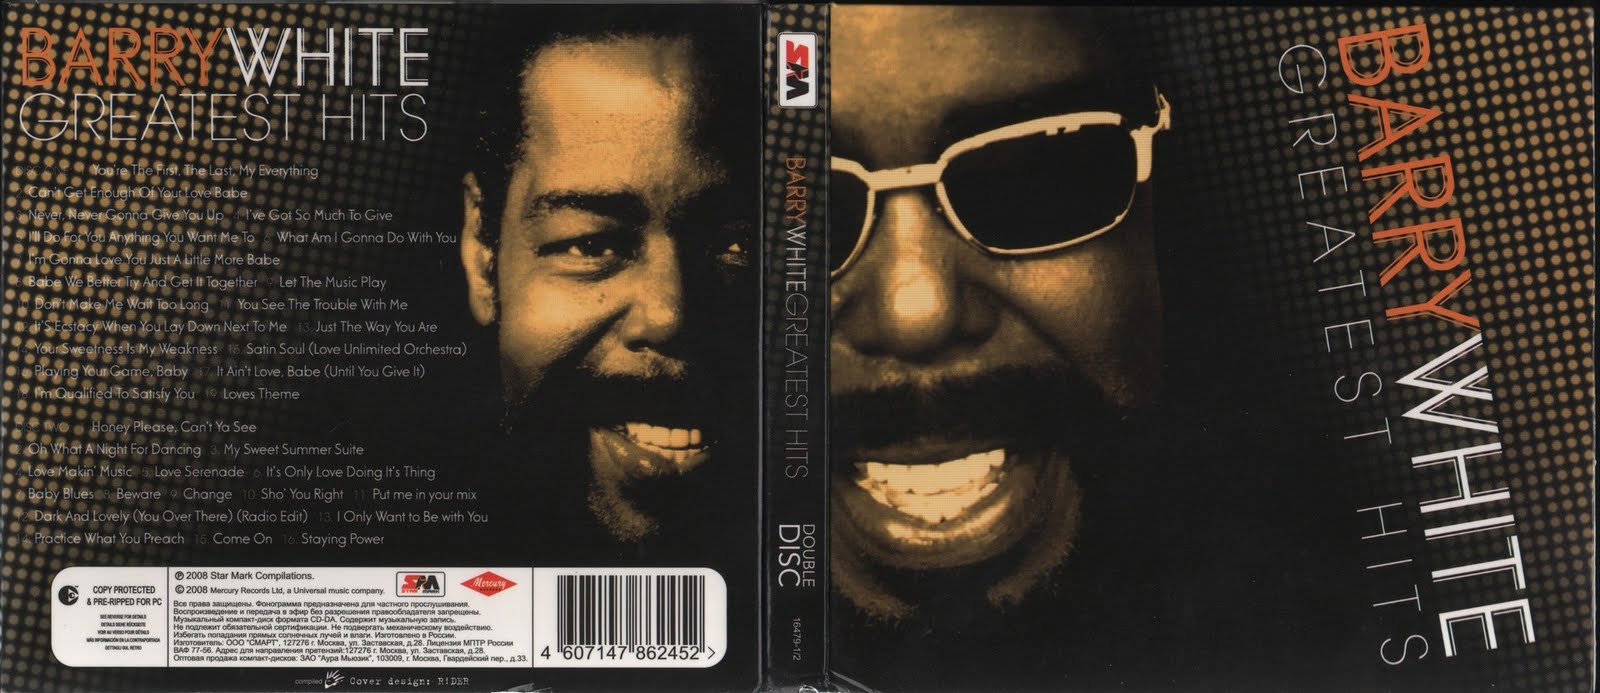 Barry White Greatest Hits 2Cd Download